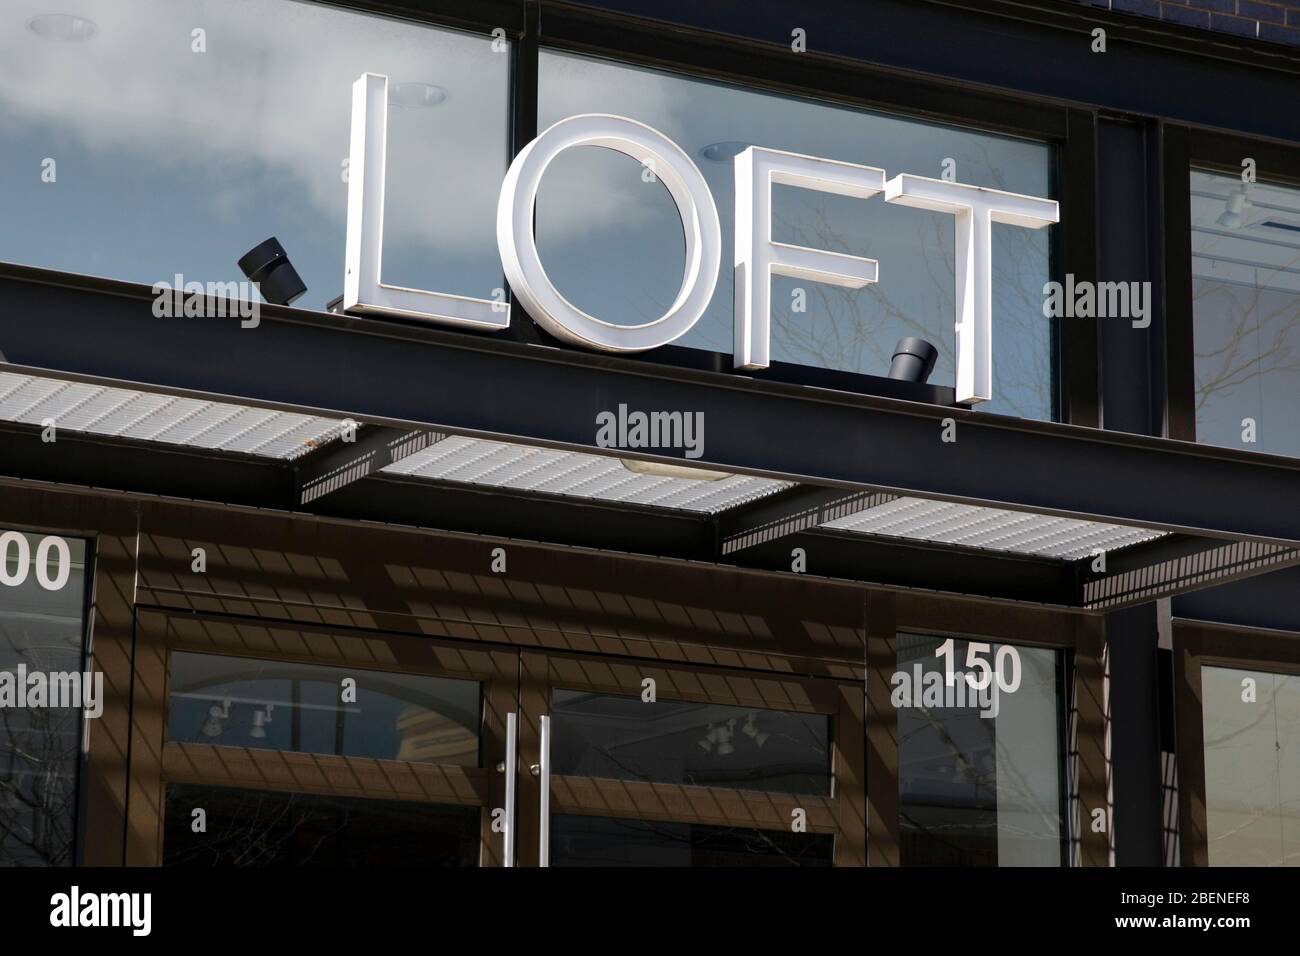 A logo sign outside of a Loft retail store location in Woodbridge, Virginia on April 2, 2020. Stock Photo